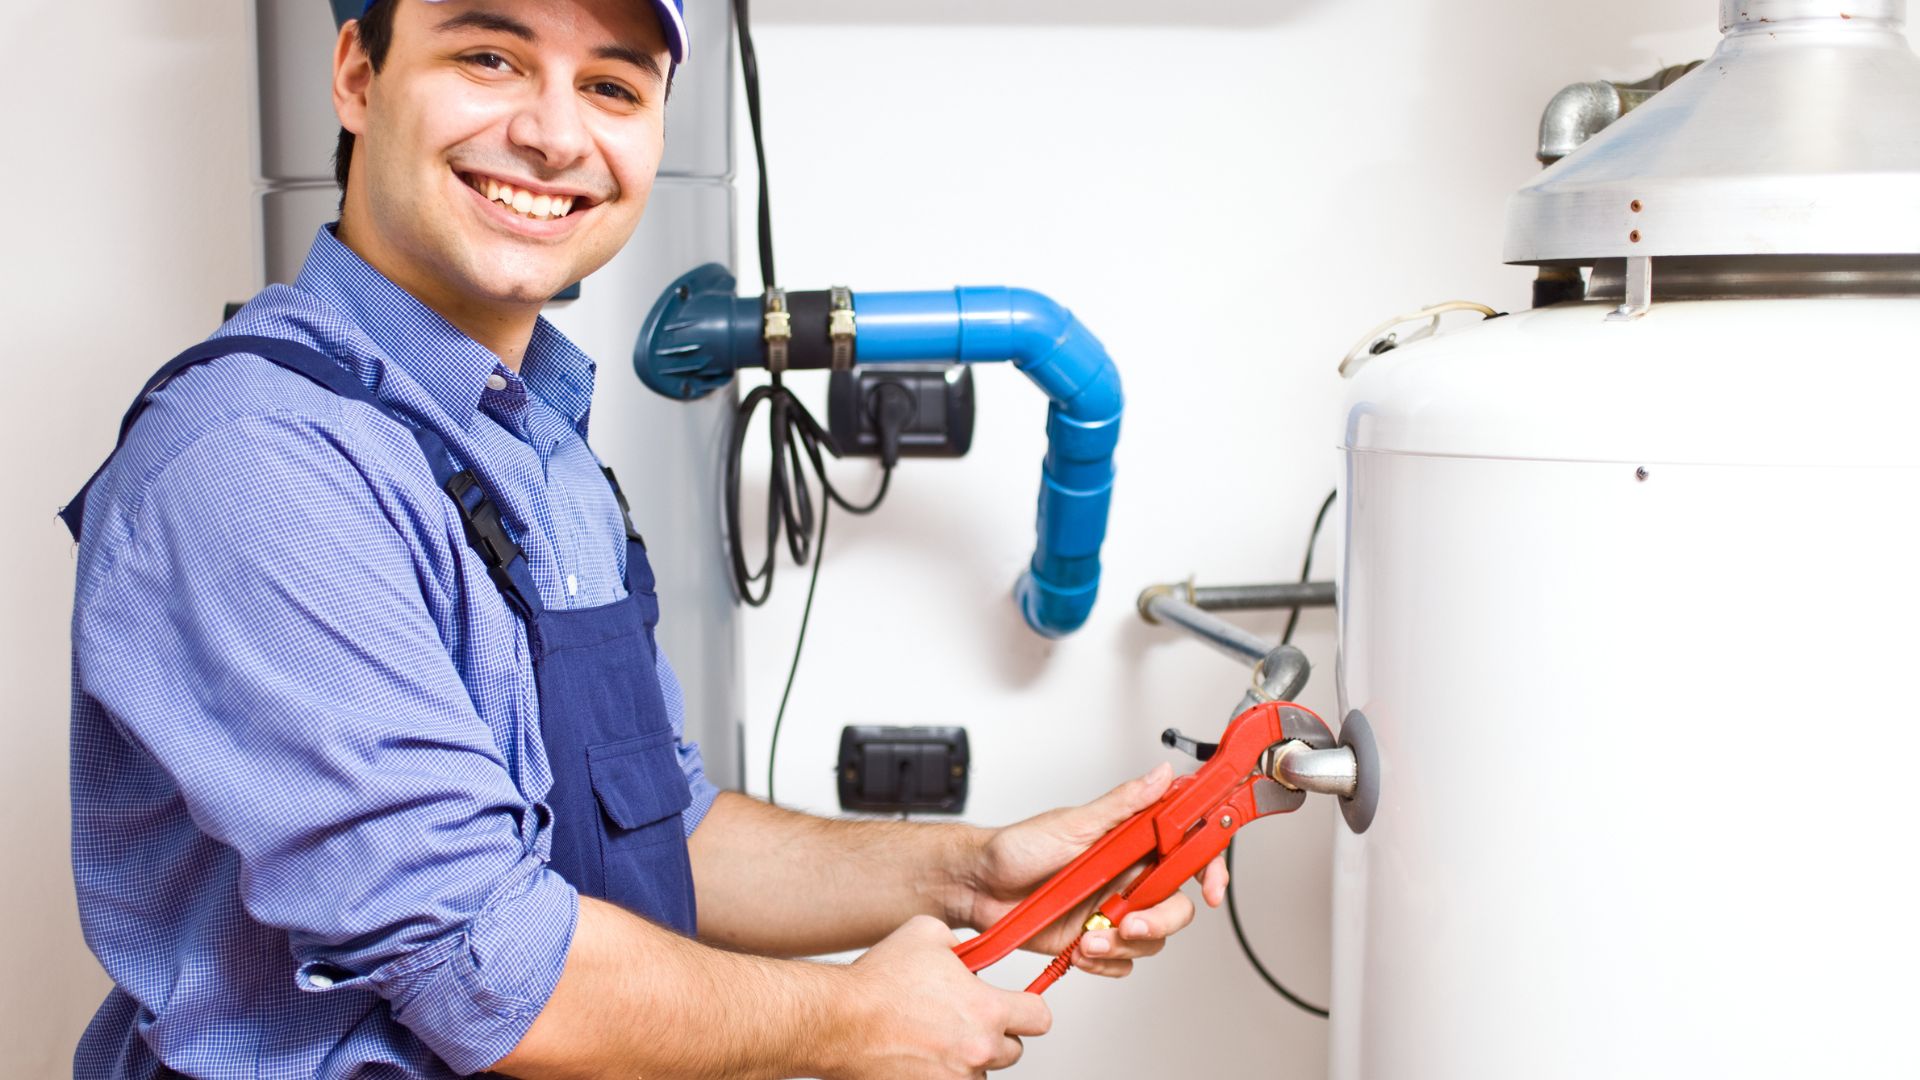 Contact CAN Plumbing and Drainage for All Your Hot Water Tank Needs with Expert Plumbers